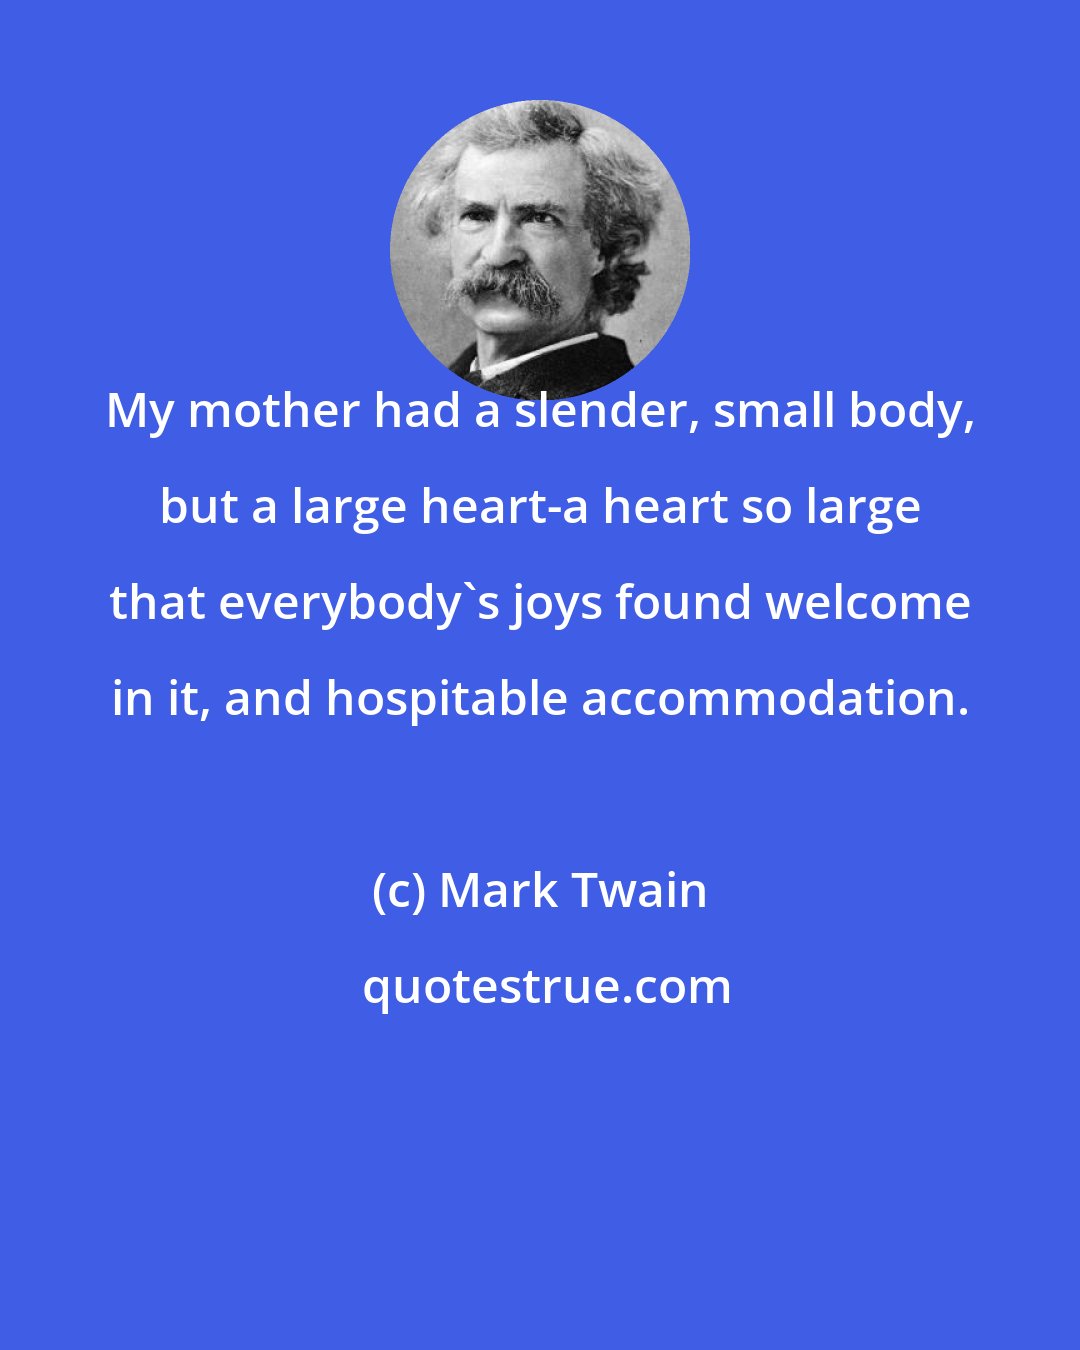 Mark Twain: My mother had a slender, small body, but a large heart-a heart so large that everybody's joys found welcome in it, and hospitable accommodation.